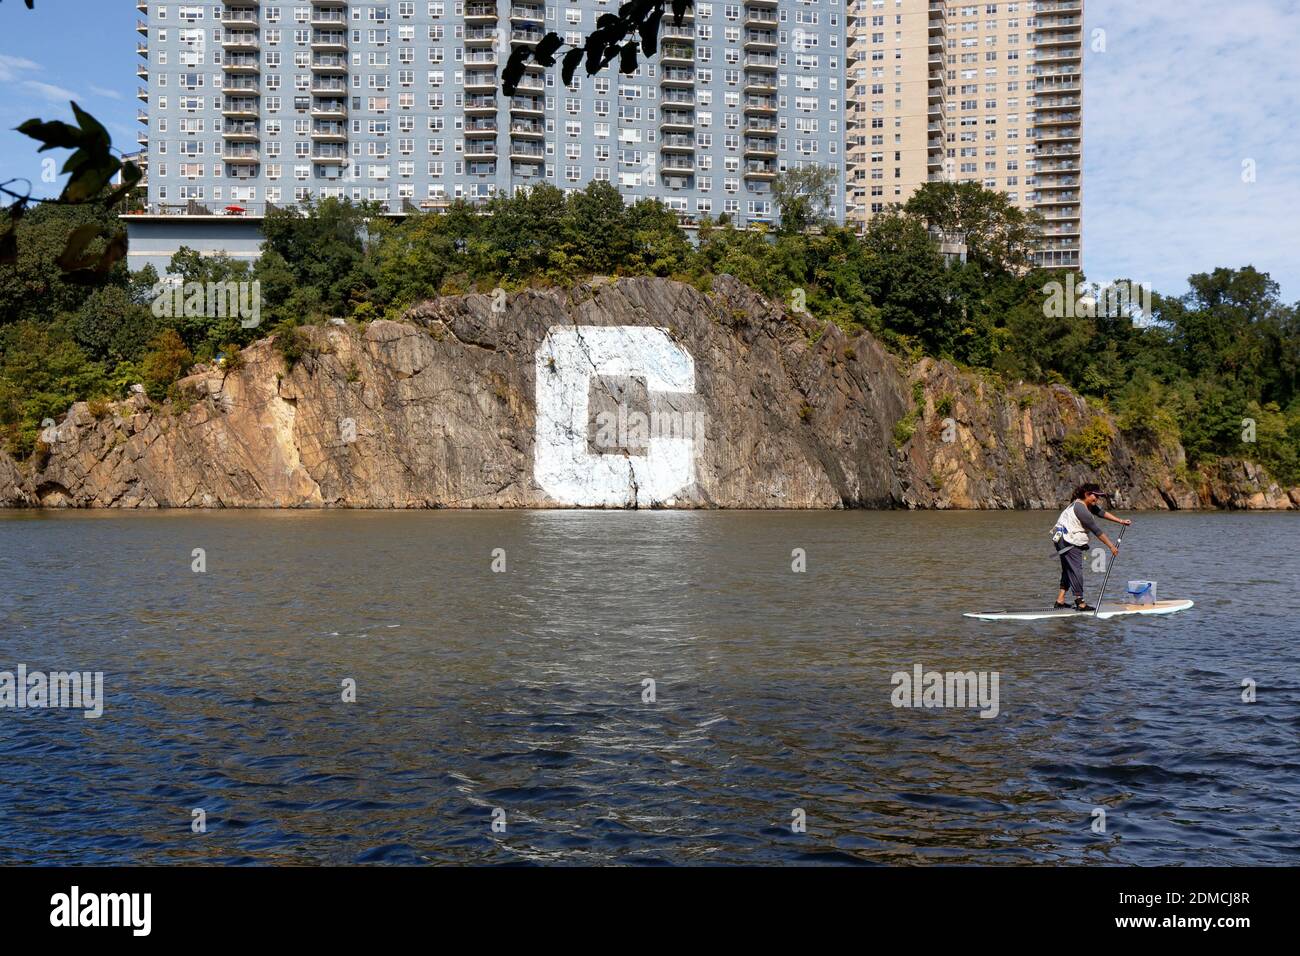 A stand-up paddler paddles by the Big C Rock on the banks of Spuyten Duyvil in New York, NY. Stock Photo